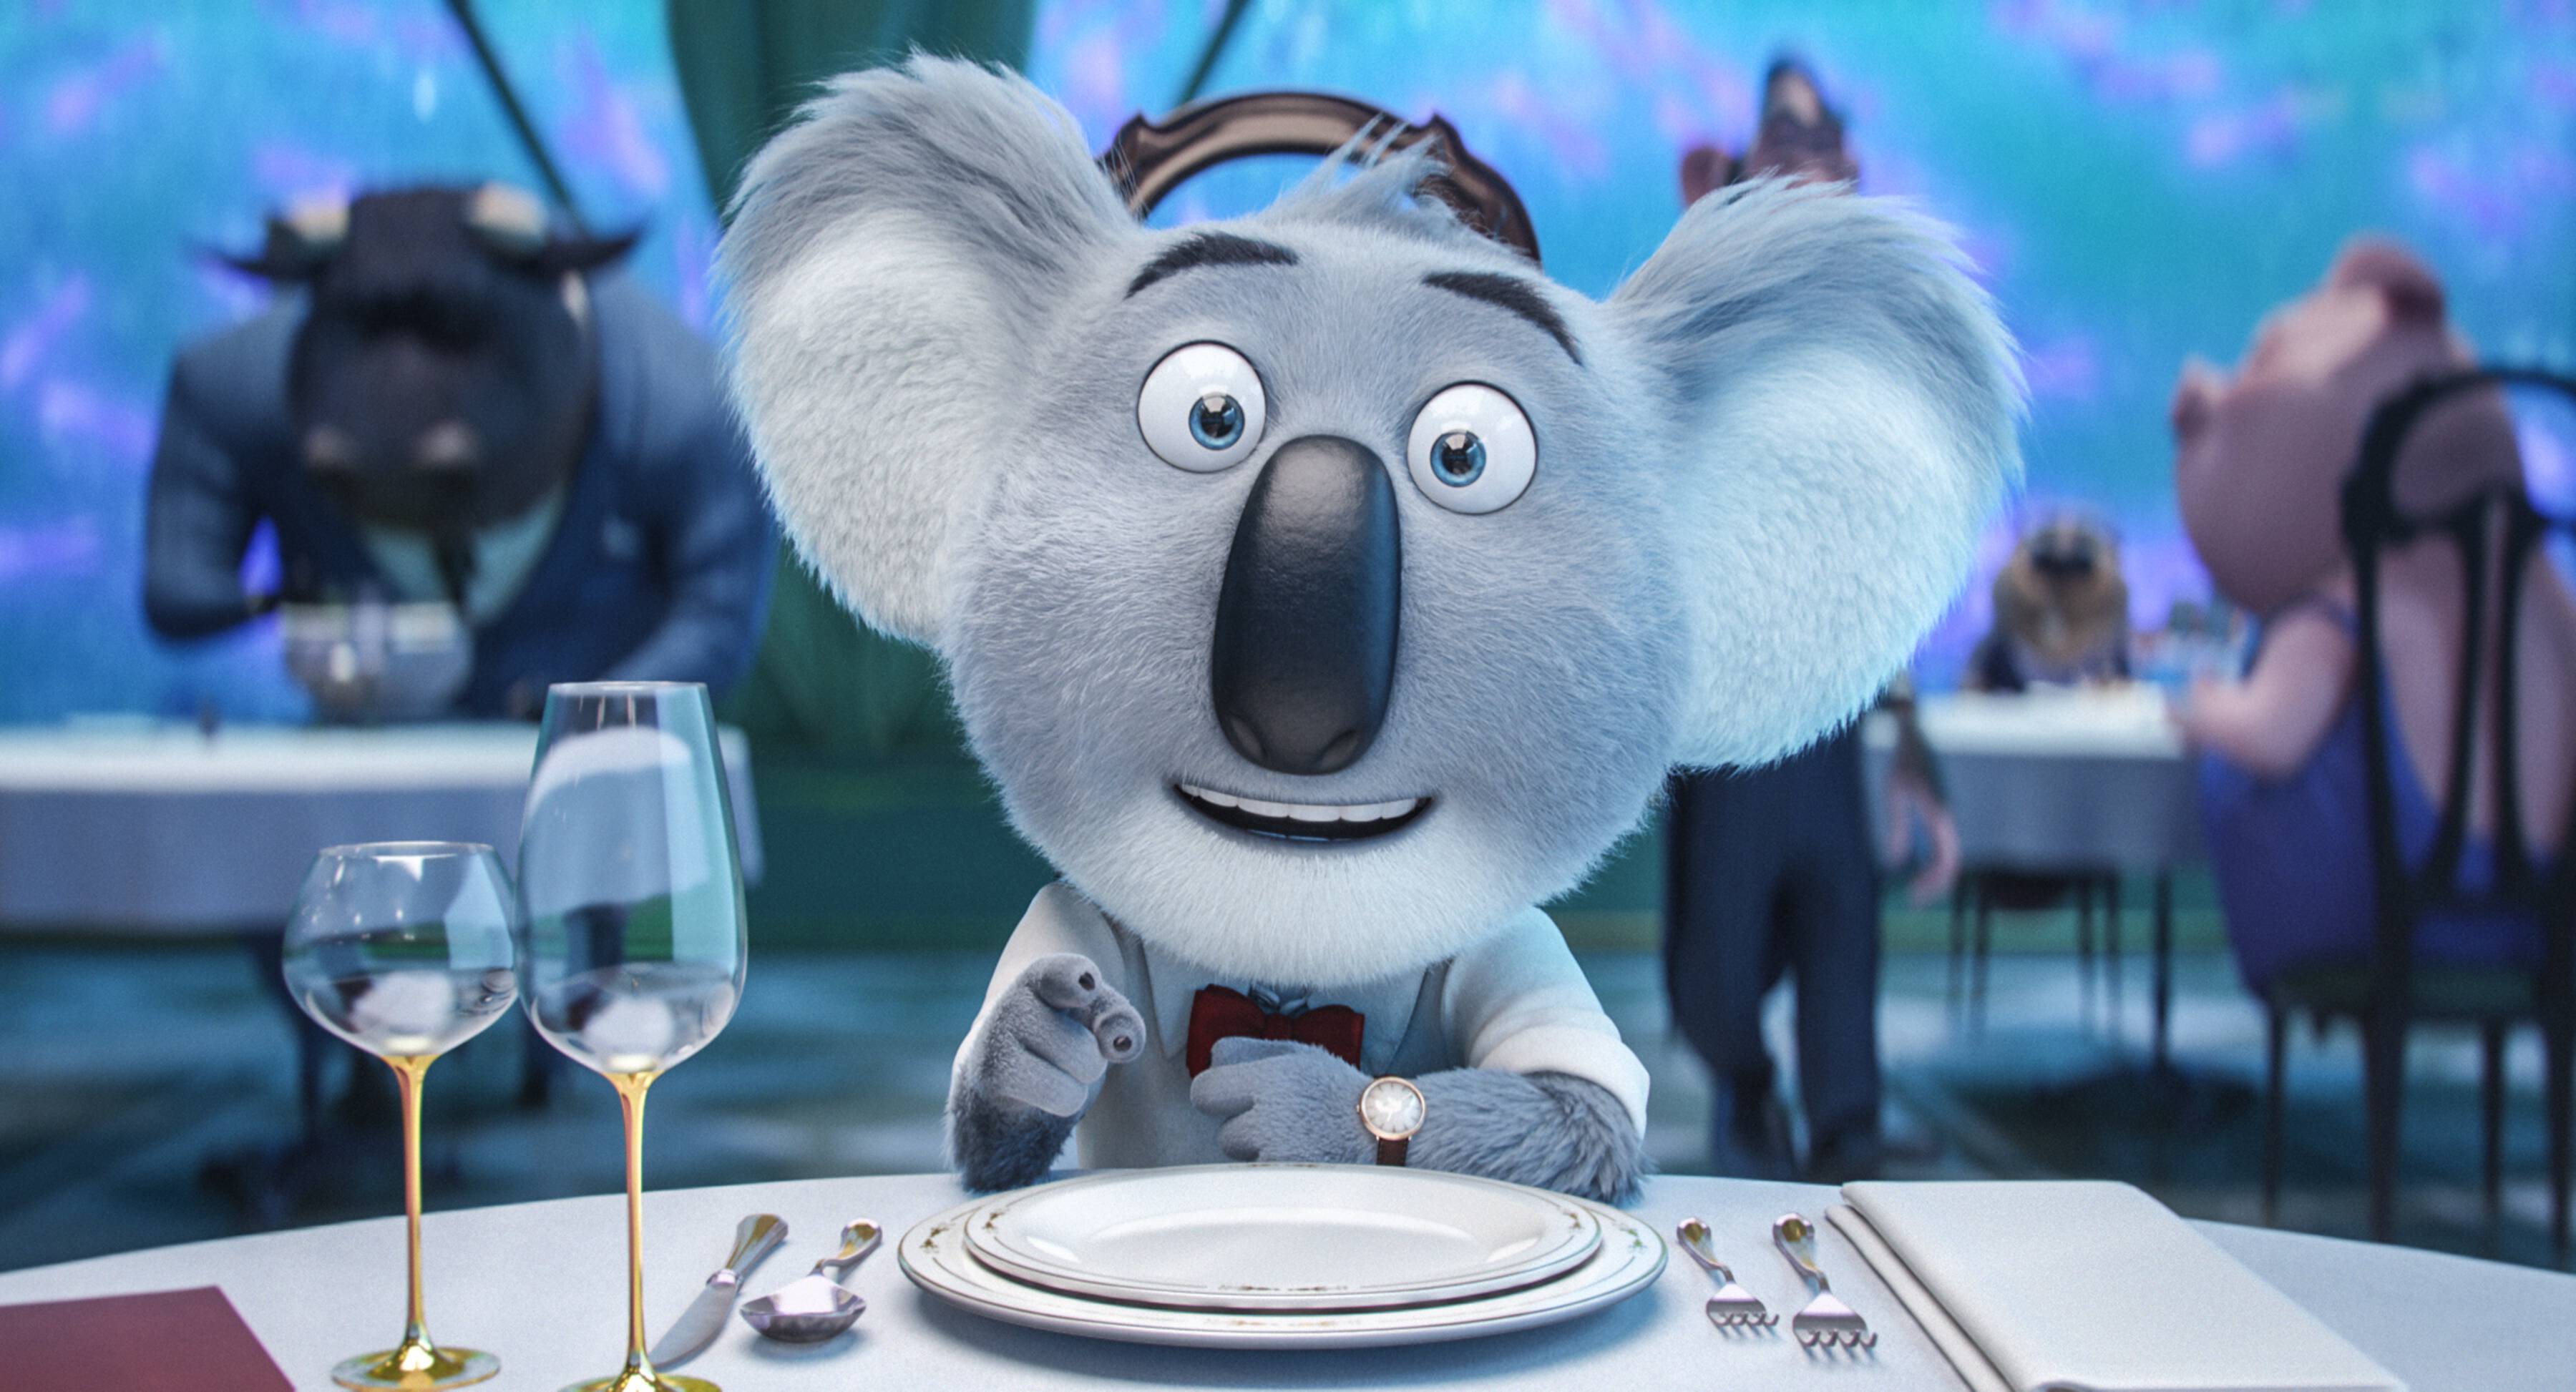 Check out the new trailer for SING, a hilarious family-friendly movie that hits theaters December 21, 2016! All-star voice cast and great story!